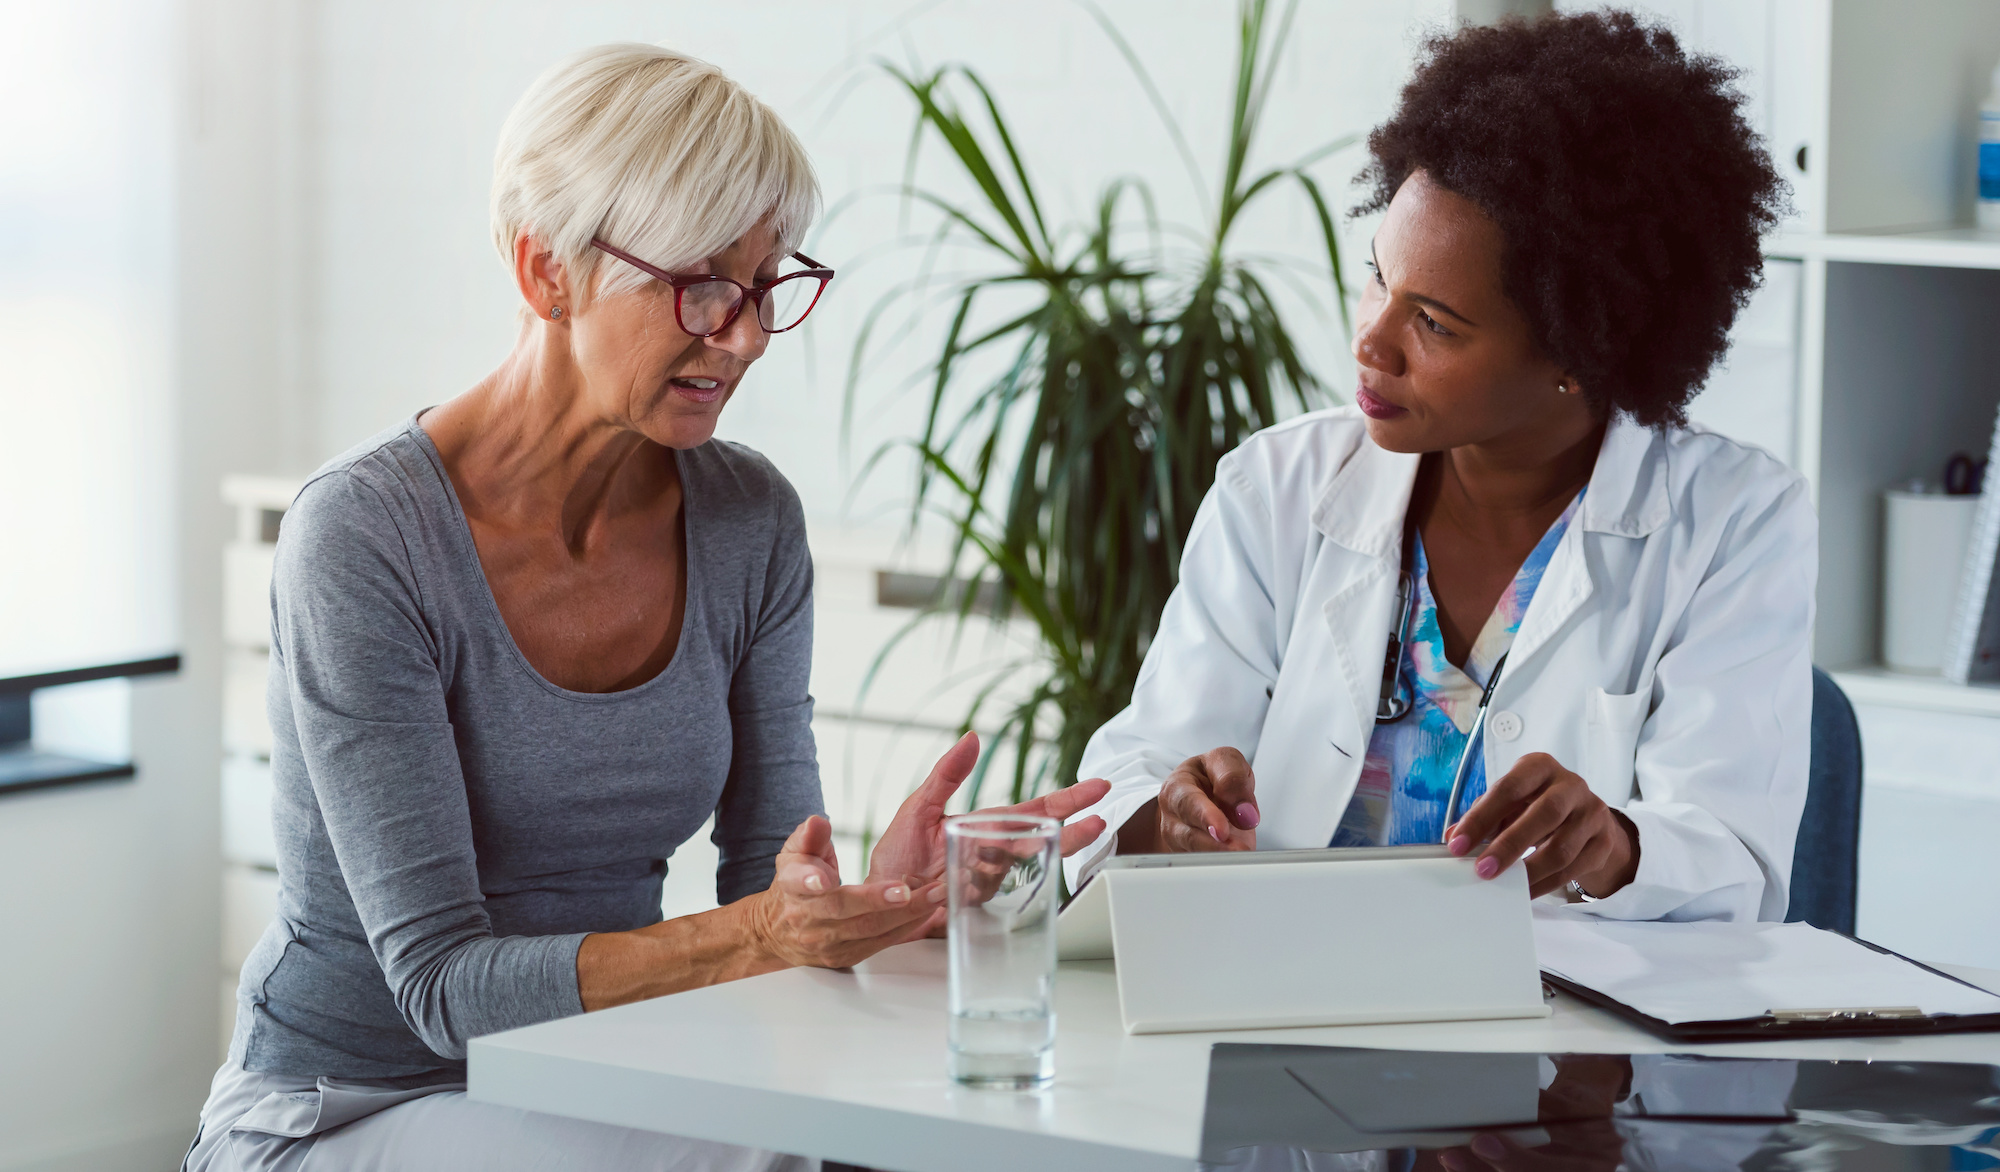 Urogyncecology consult with female patient | Vanguard Communications | Denver, CO | San Jose, CA